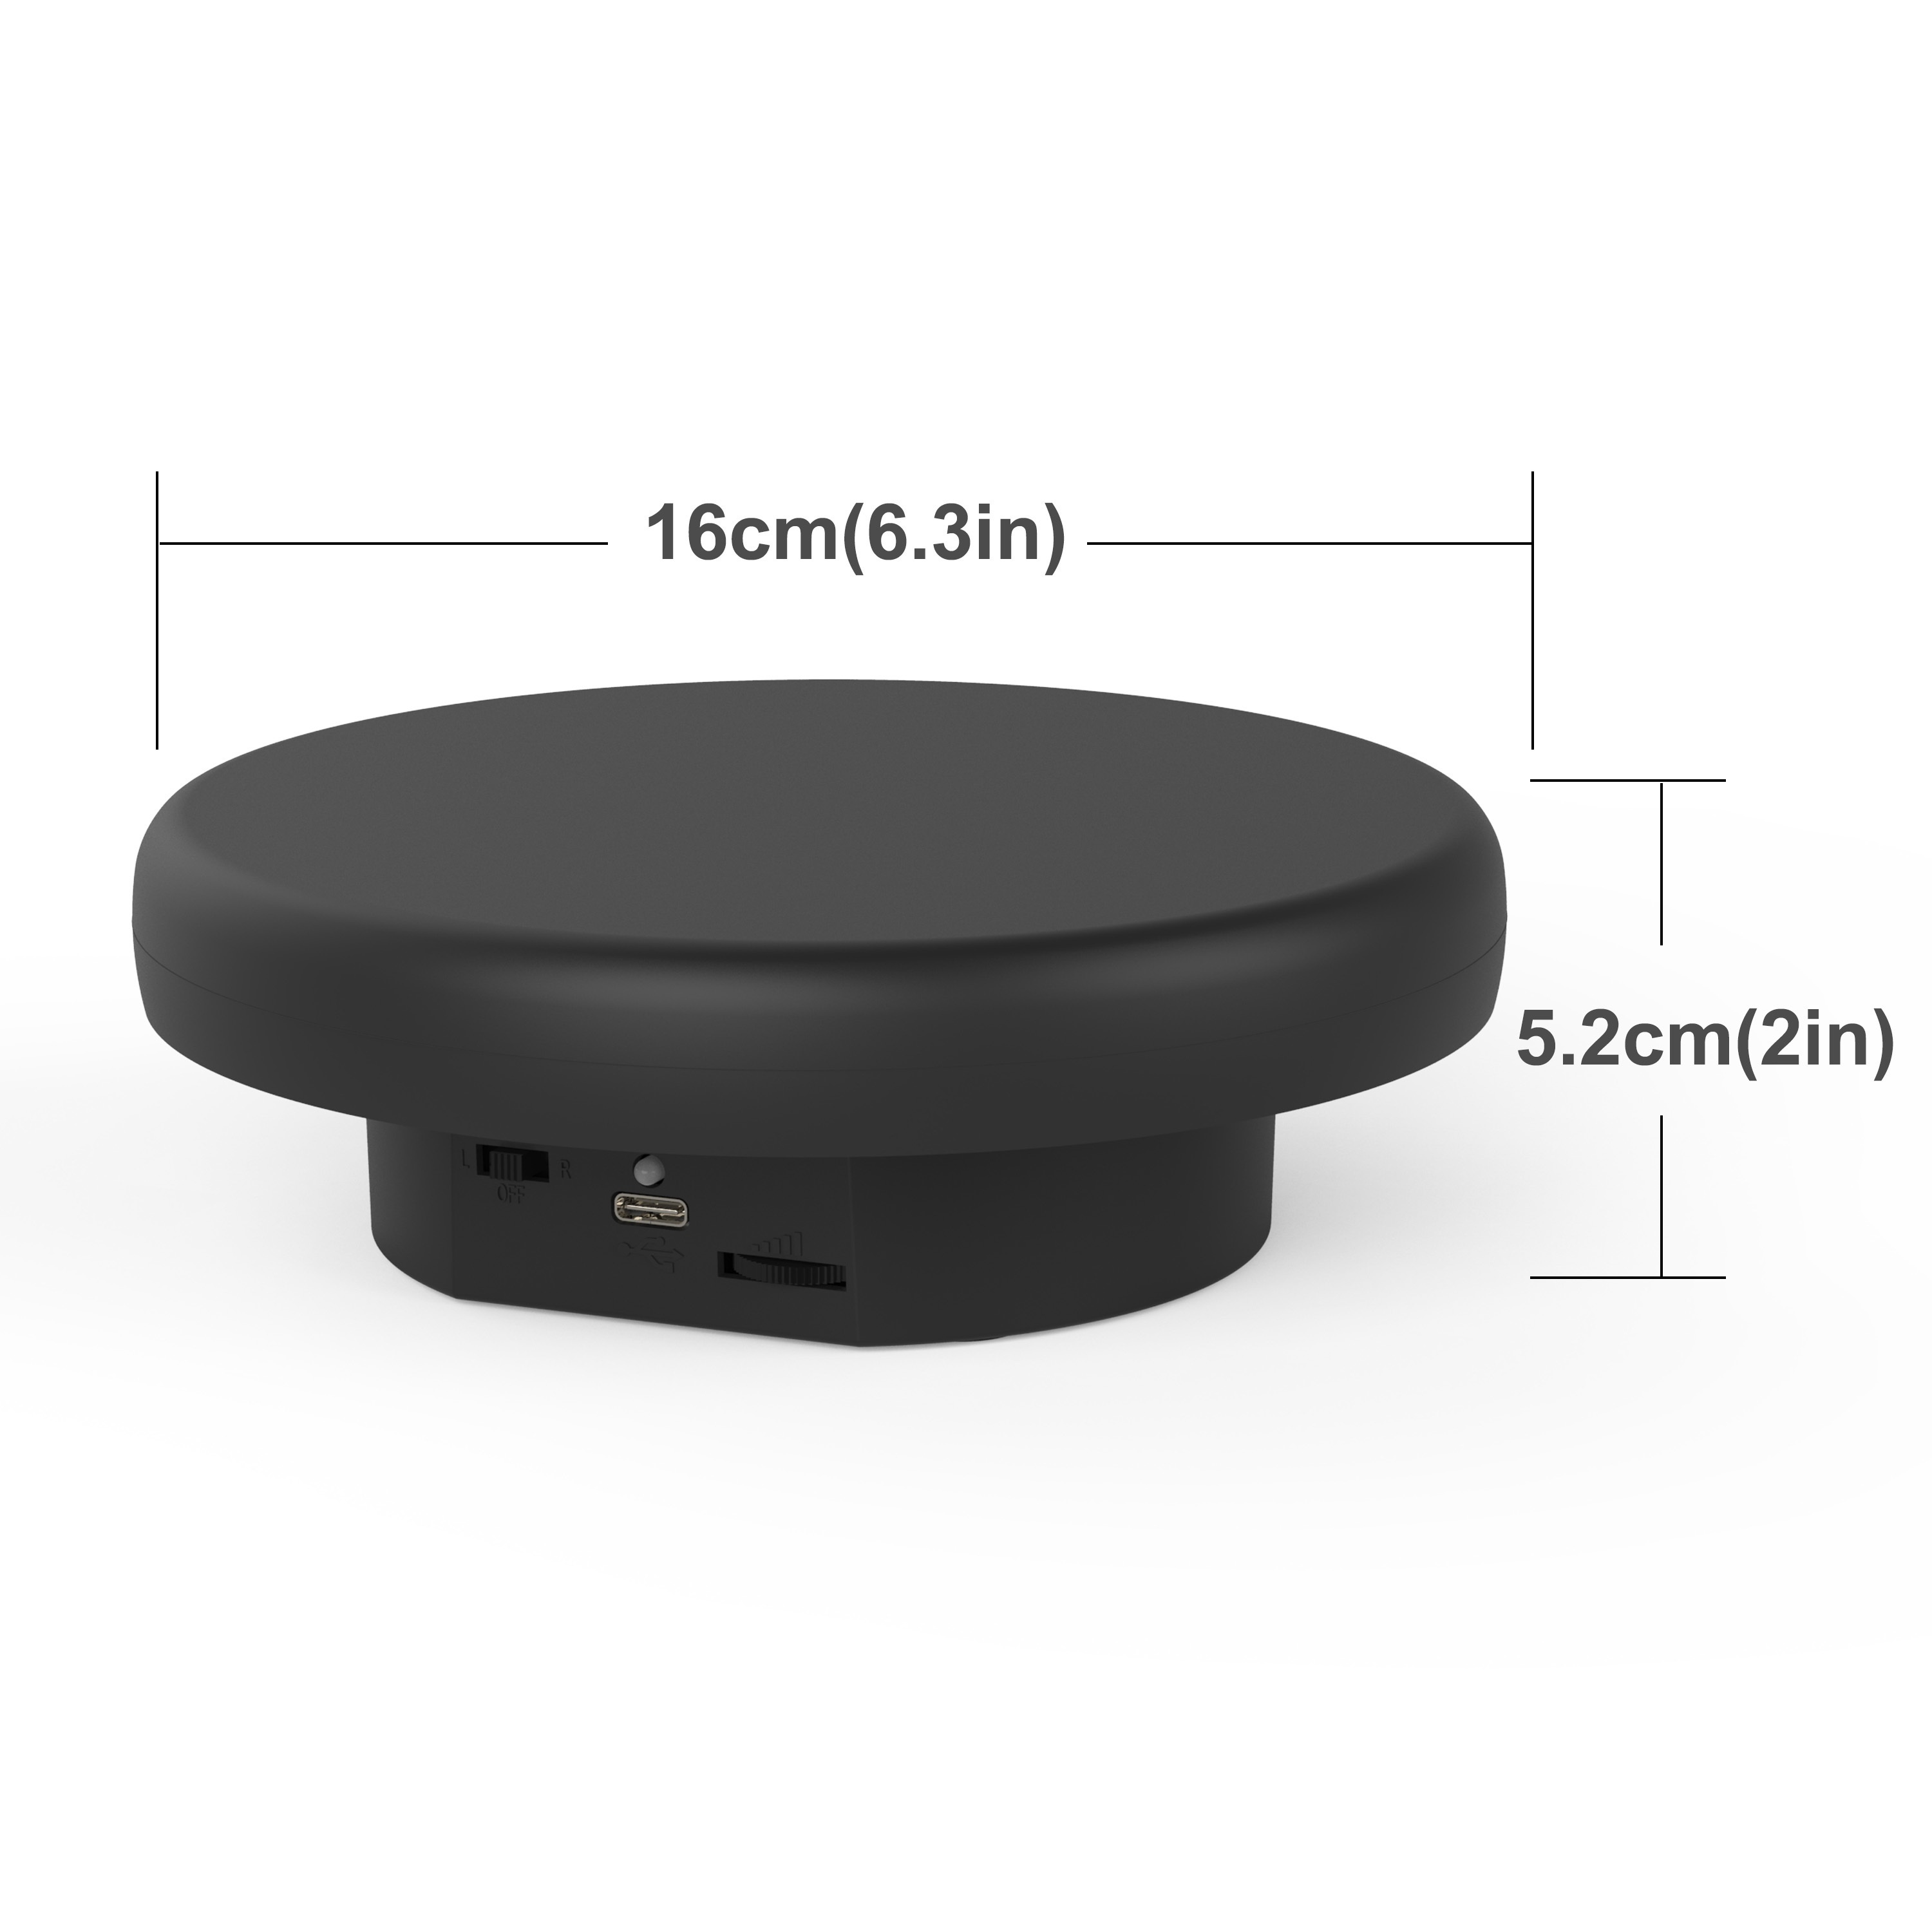  CEXUW Display 360 Degree Electric Turntable,for Small